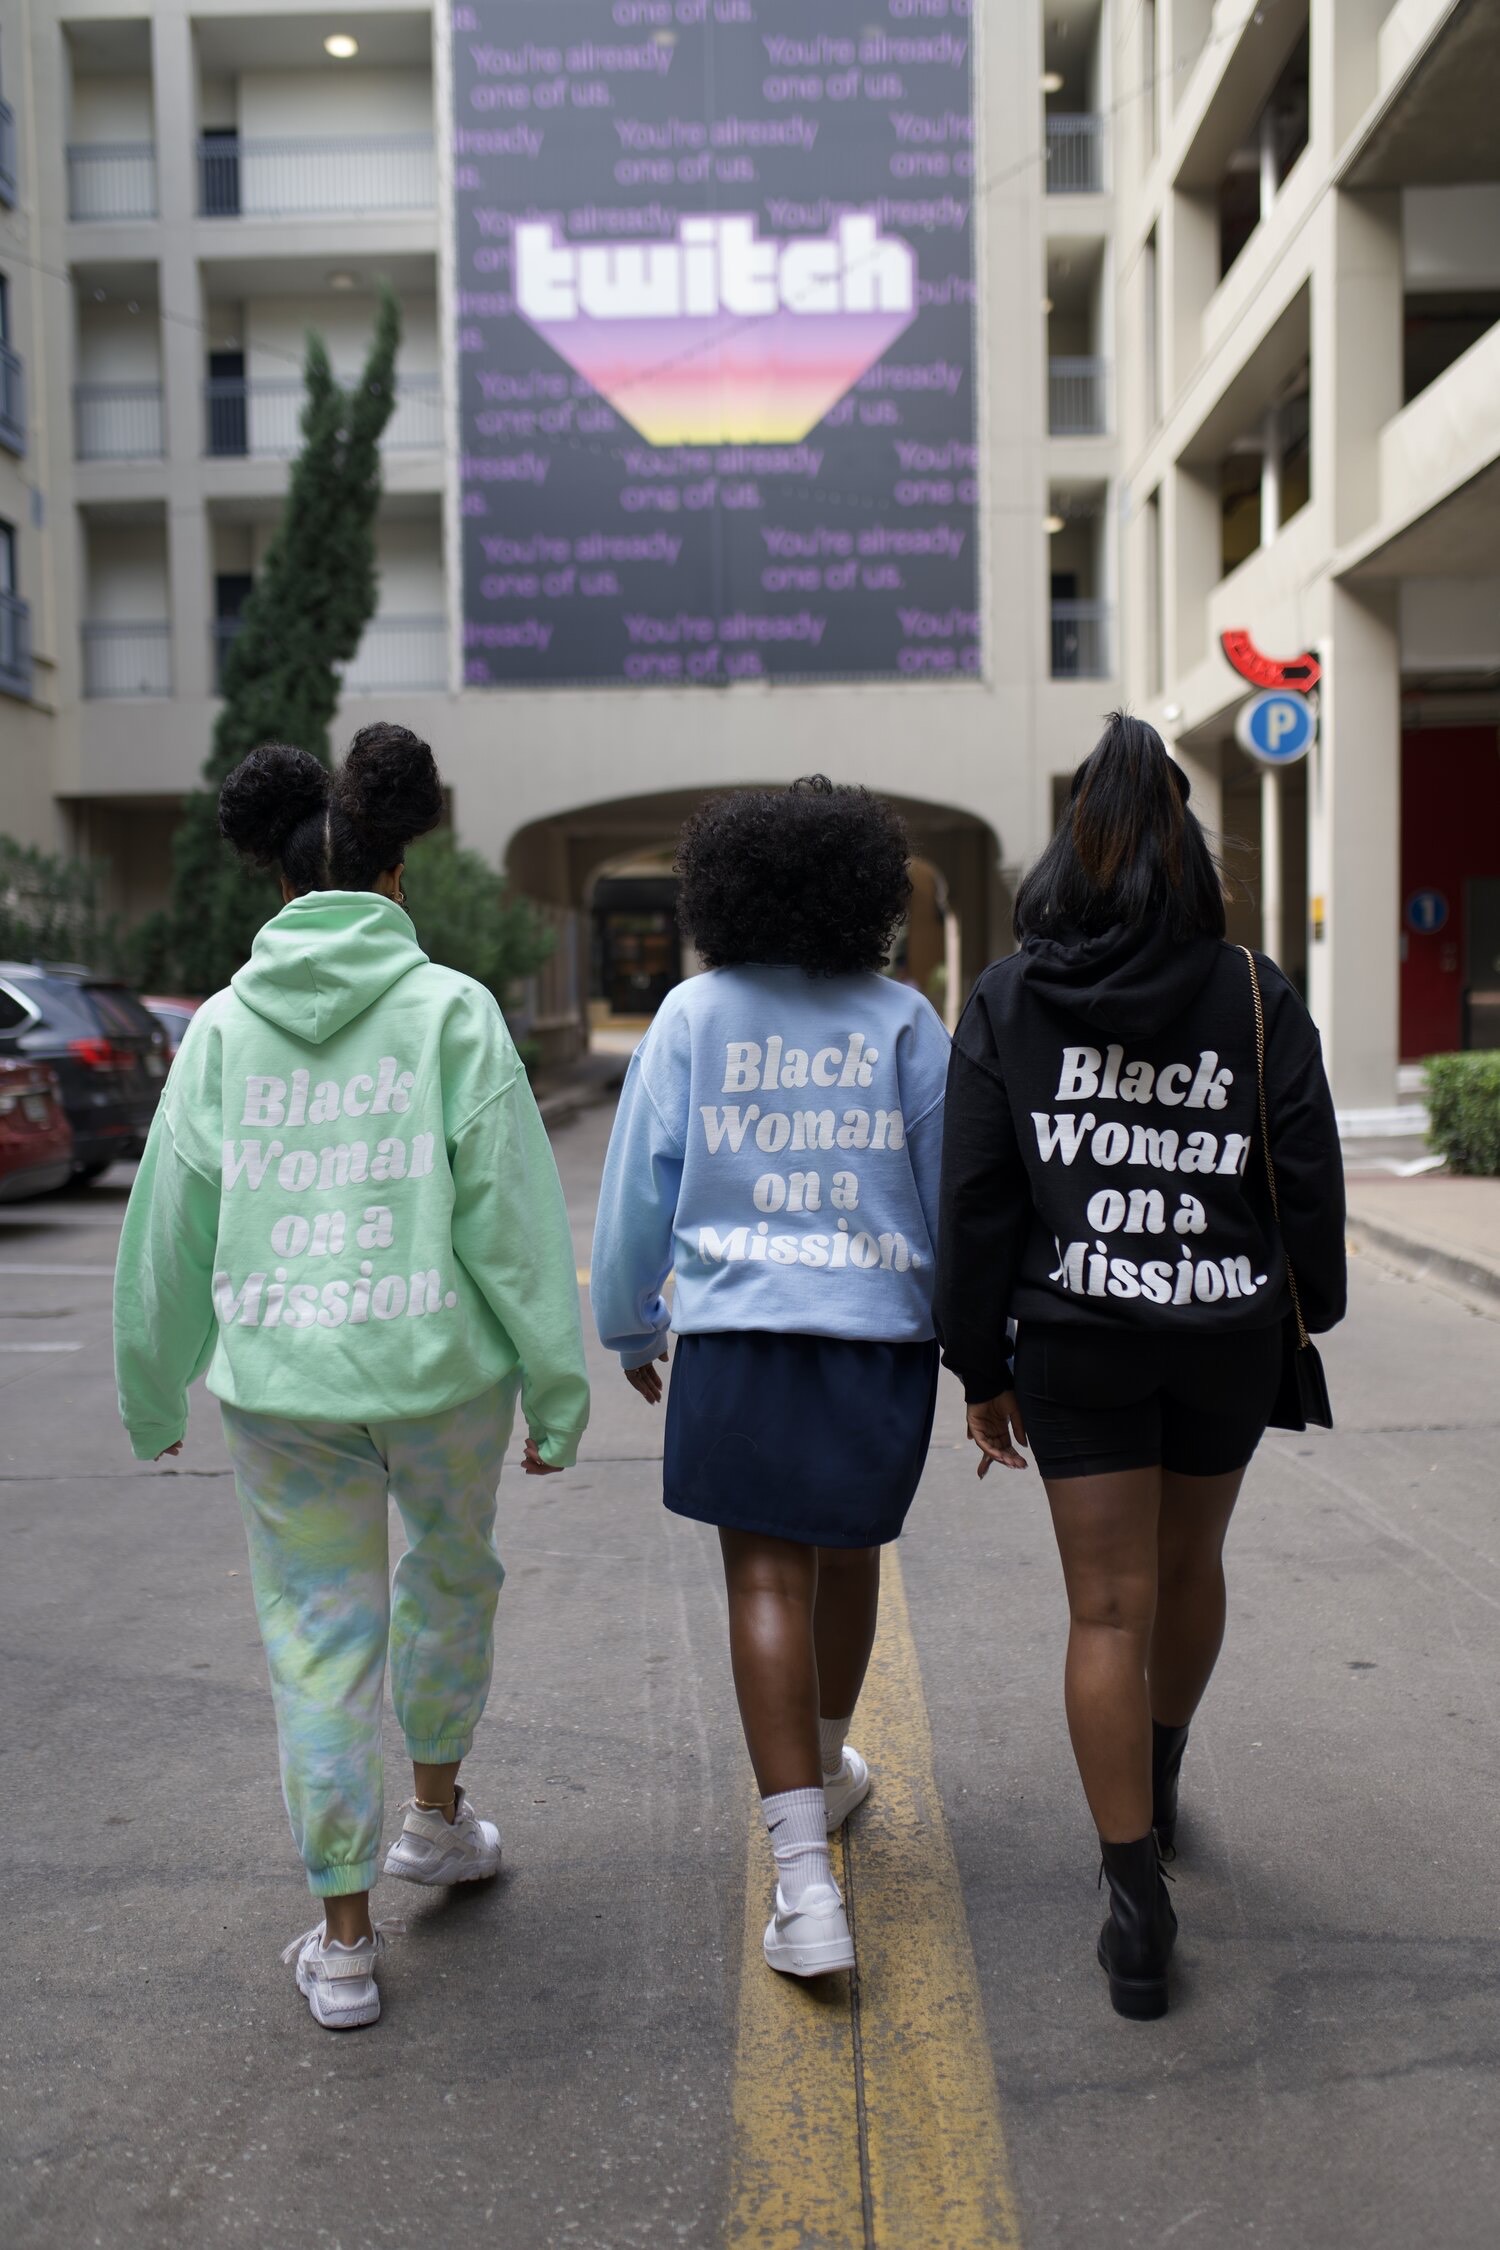 Three women walking with their backs toward the photographer outside with Black Woman On A Mission hoodies and crew necks in various colors,